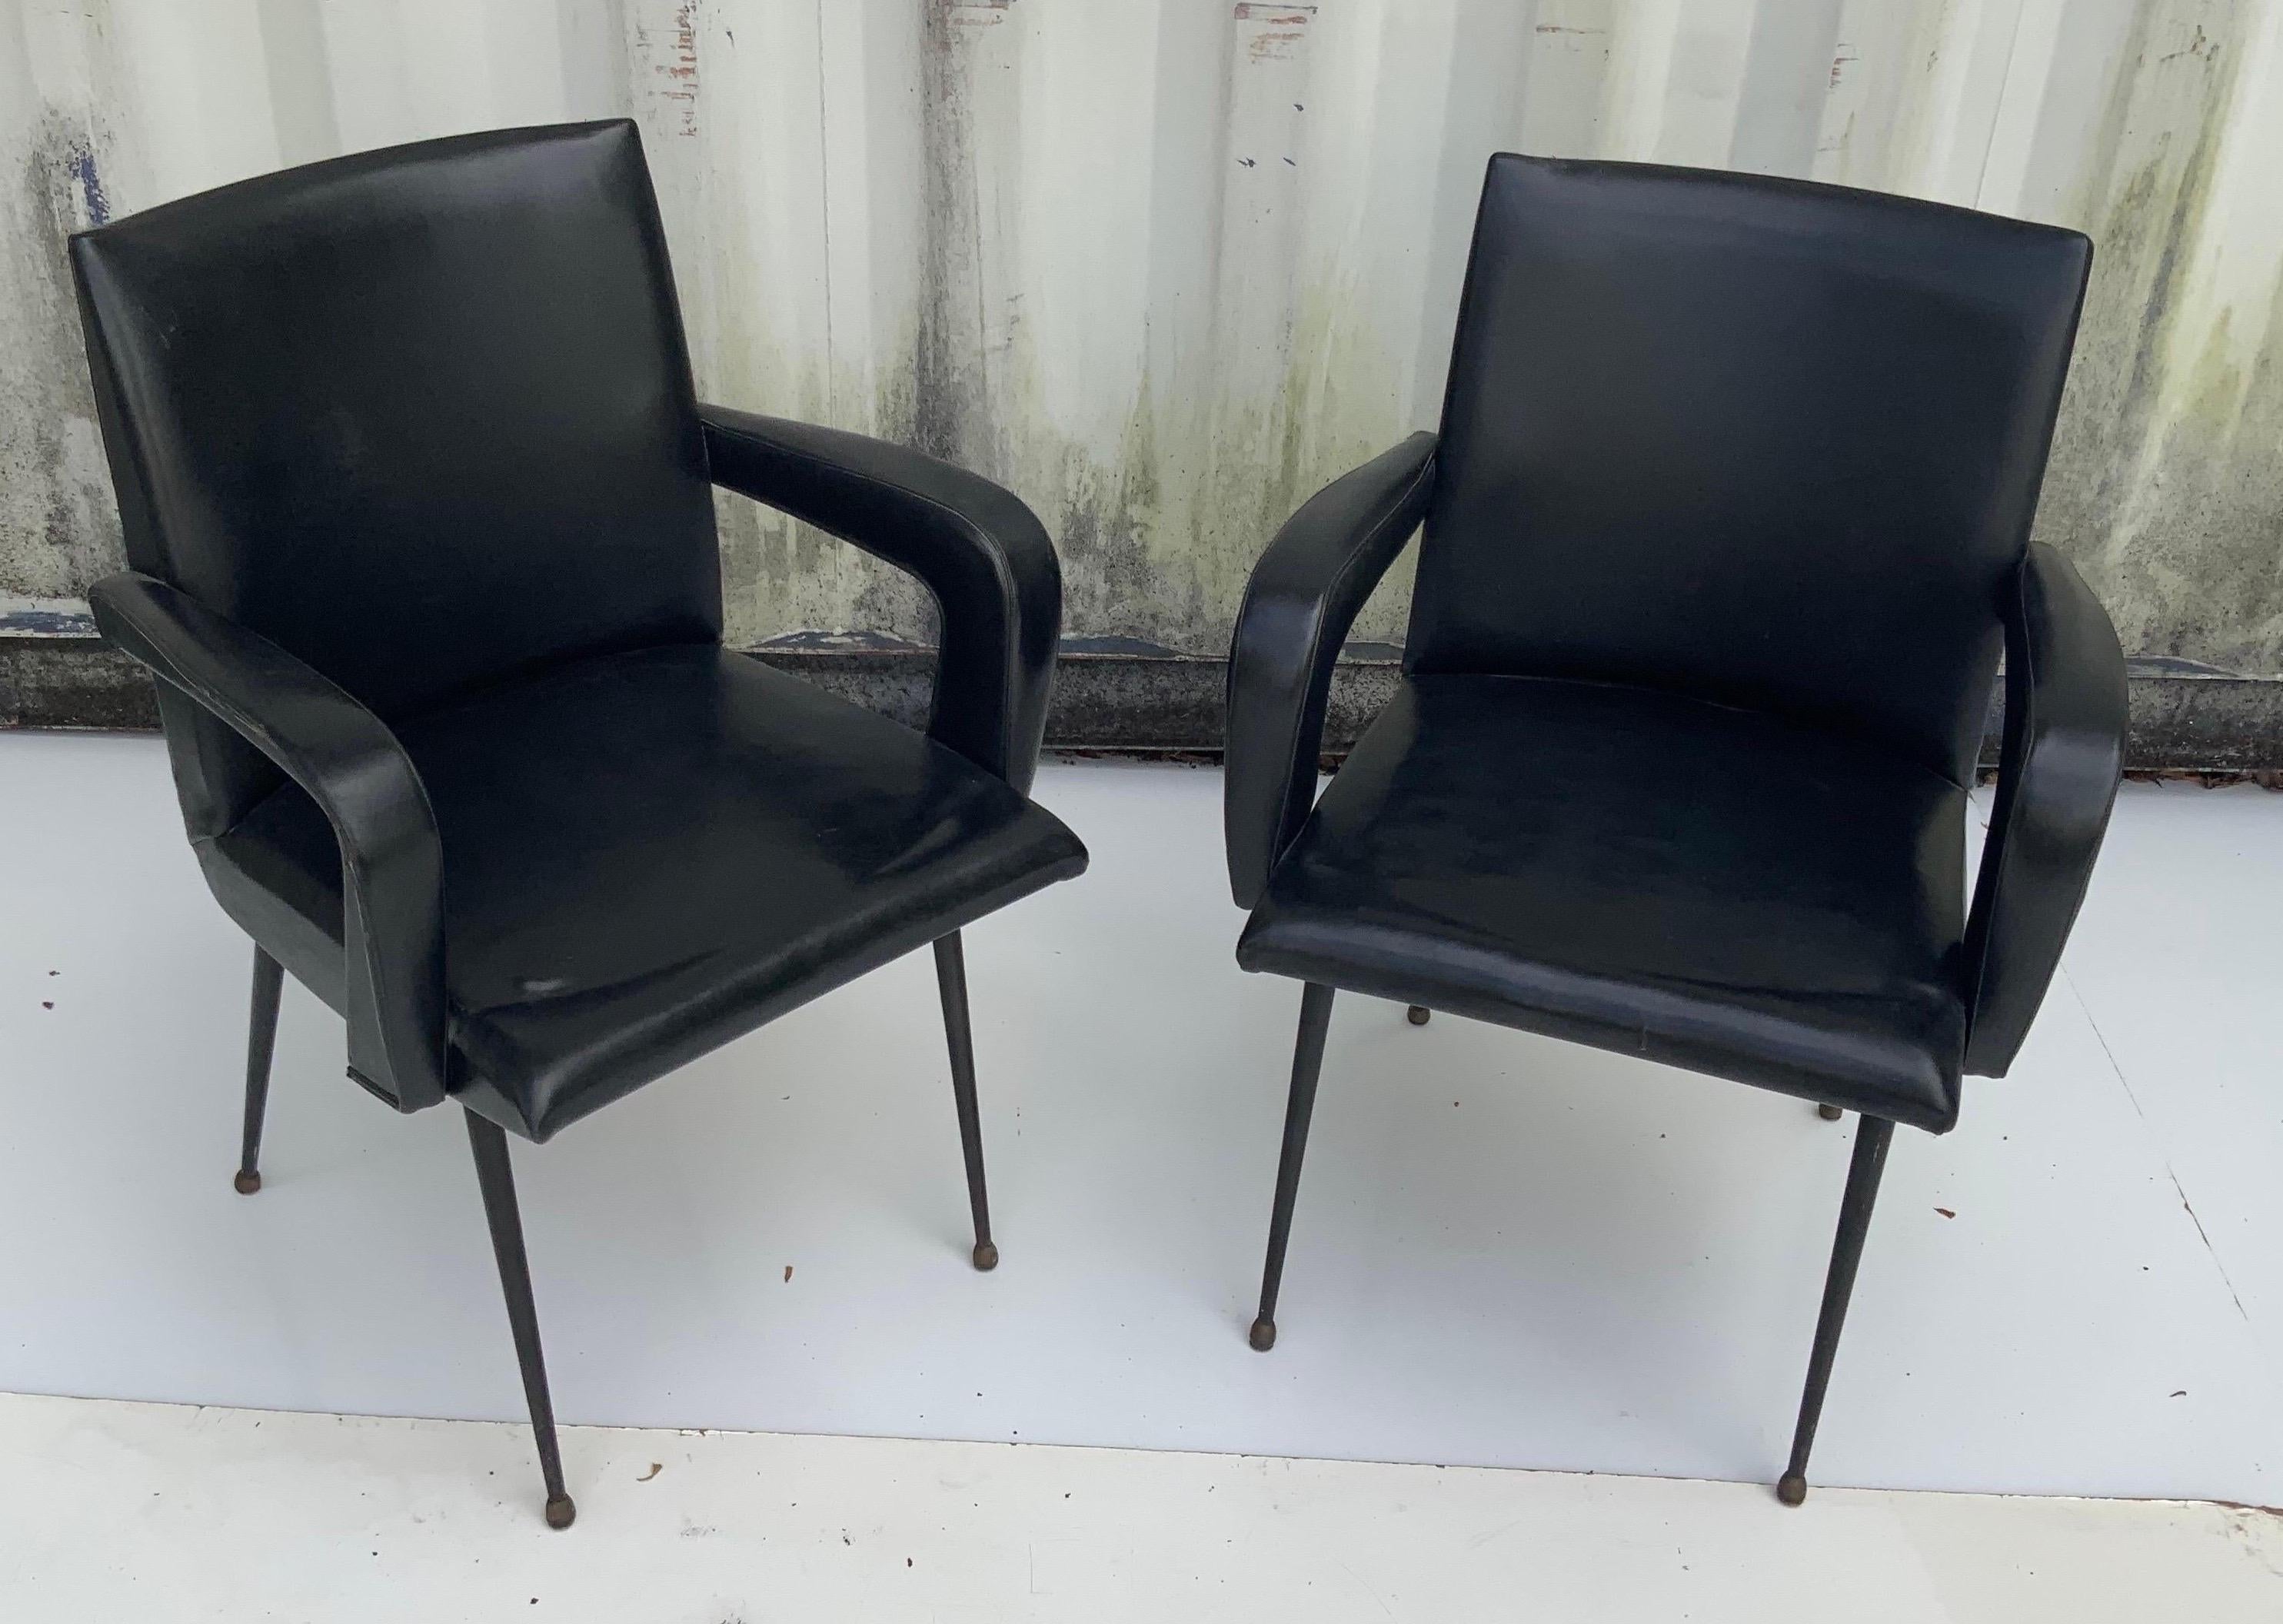 Pair of Jacques Adnet style armchair, Faux stitched leather.
Original good condition.